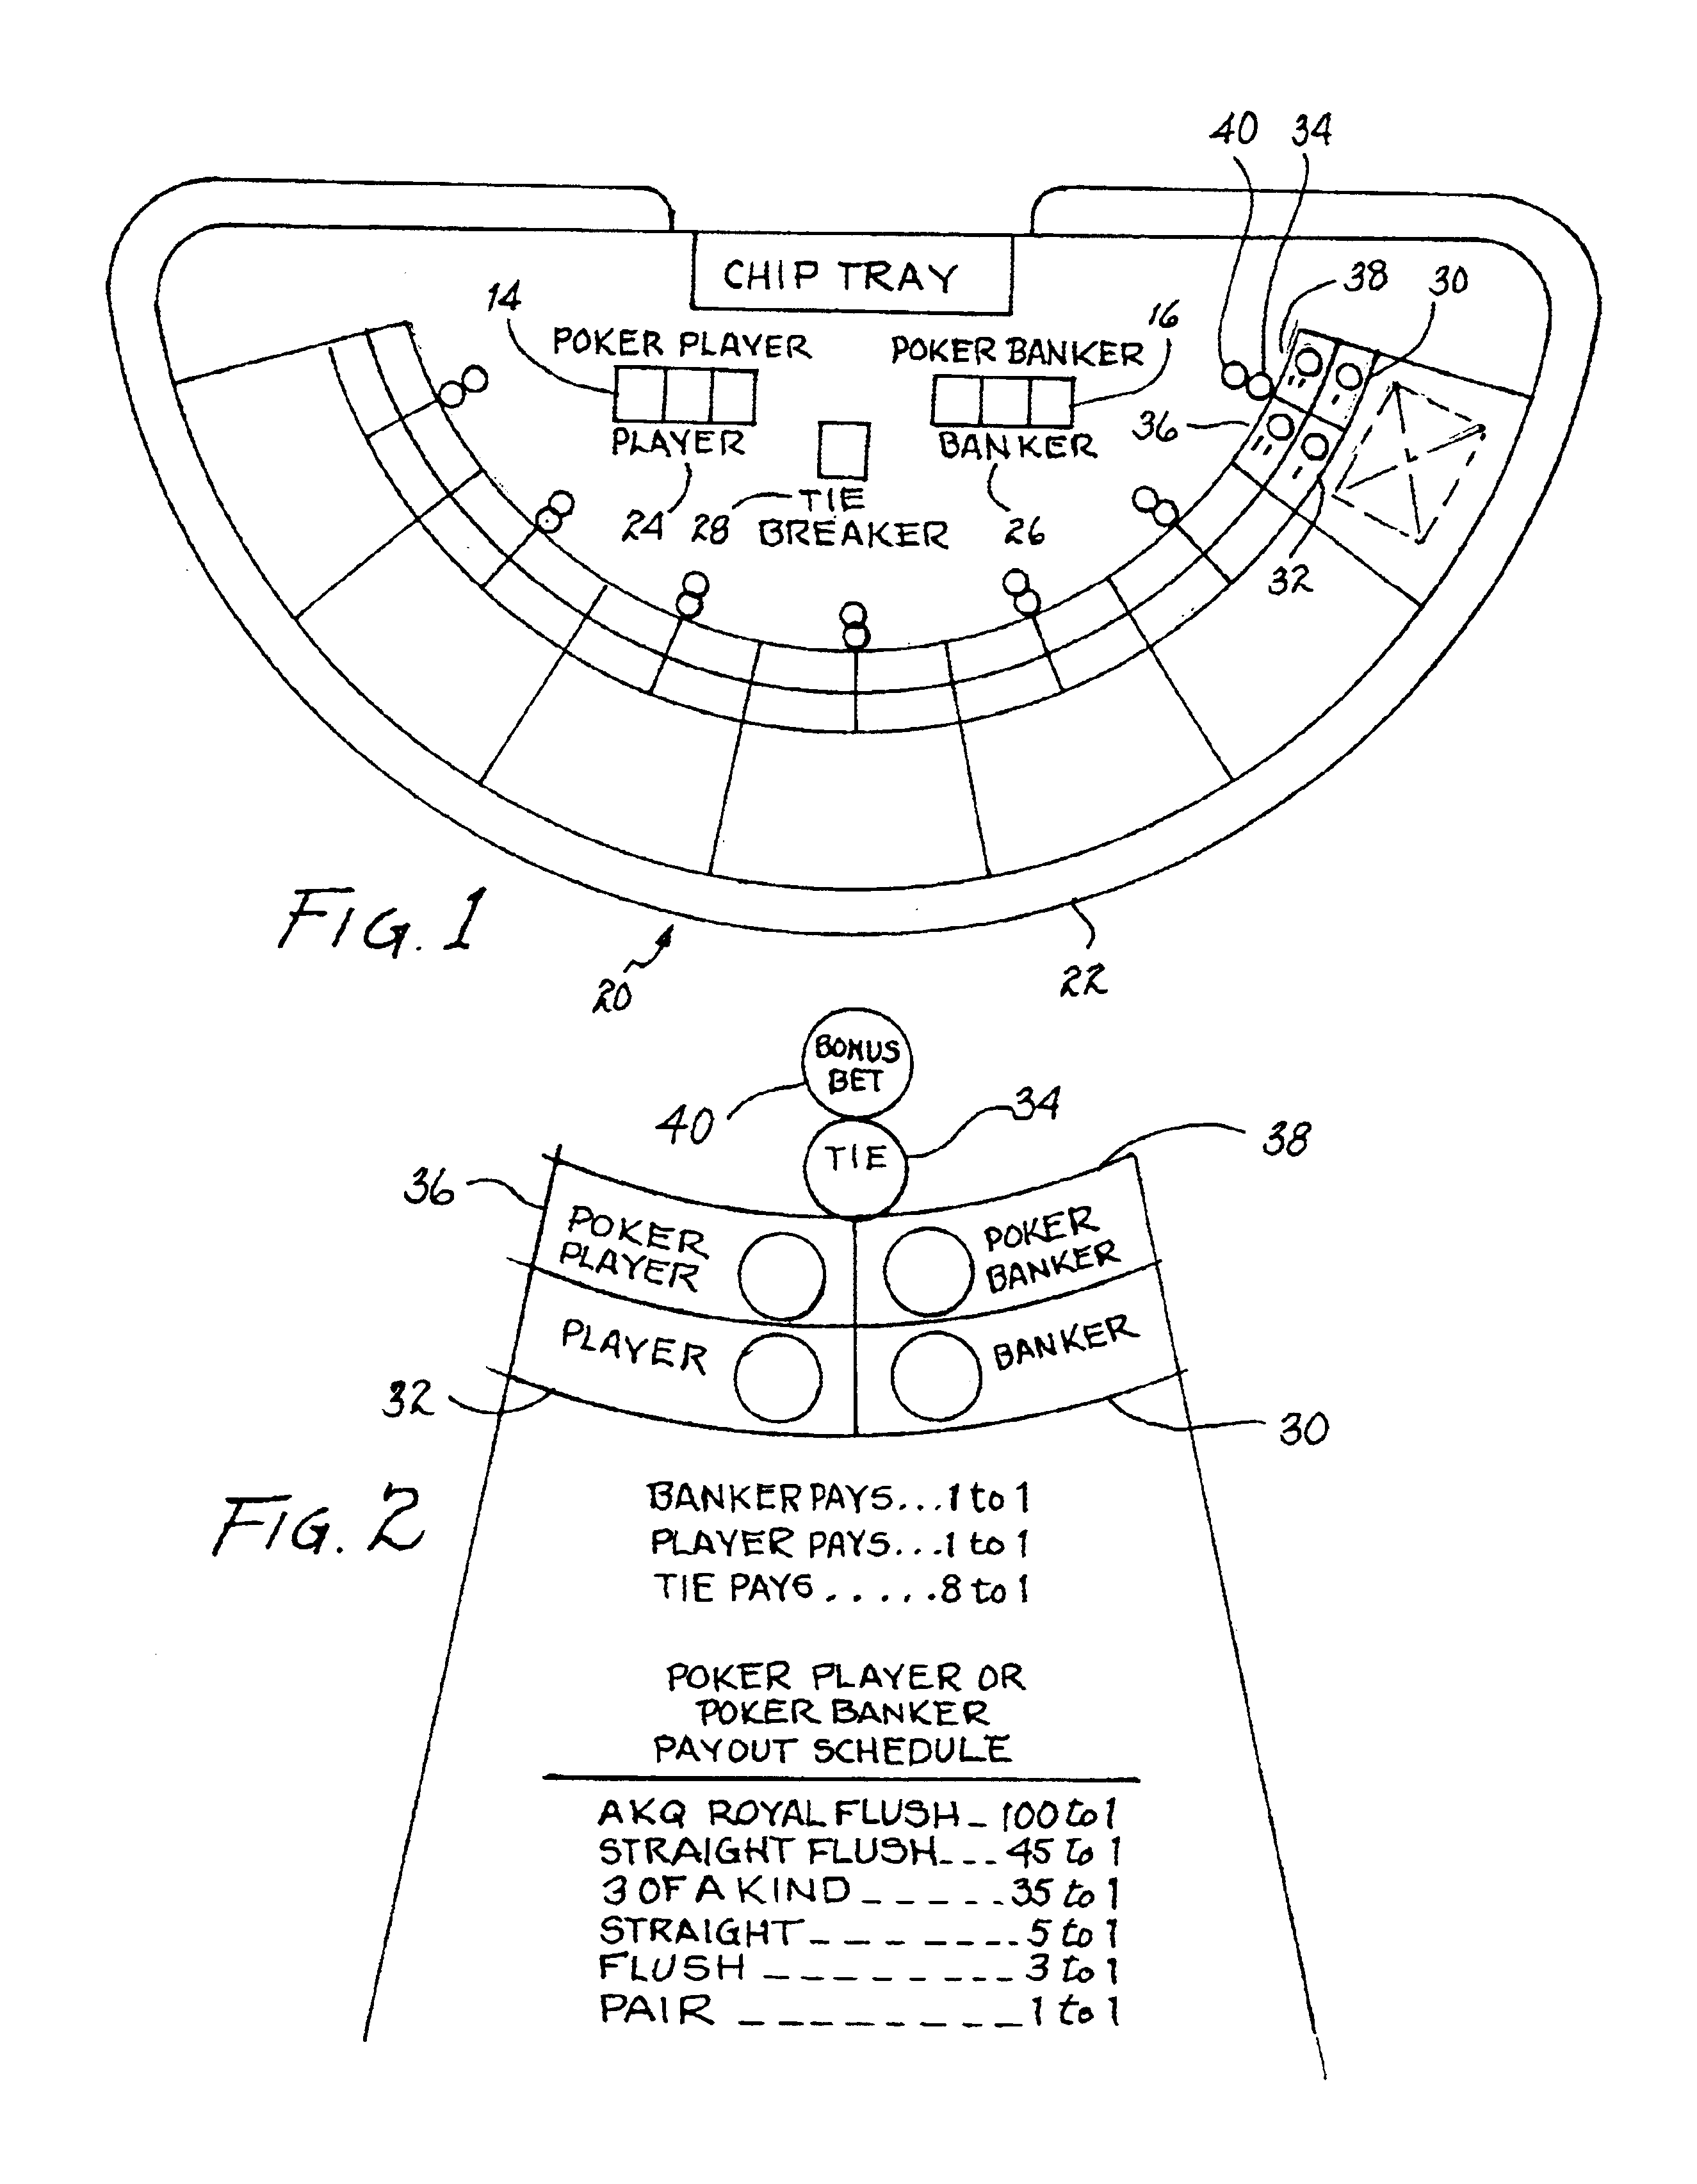 Table and method of playing a baccarat-type card game